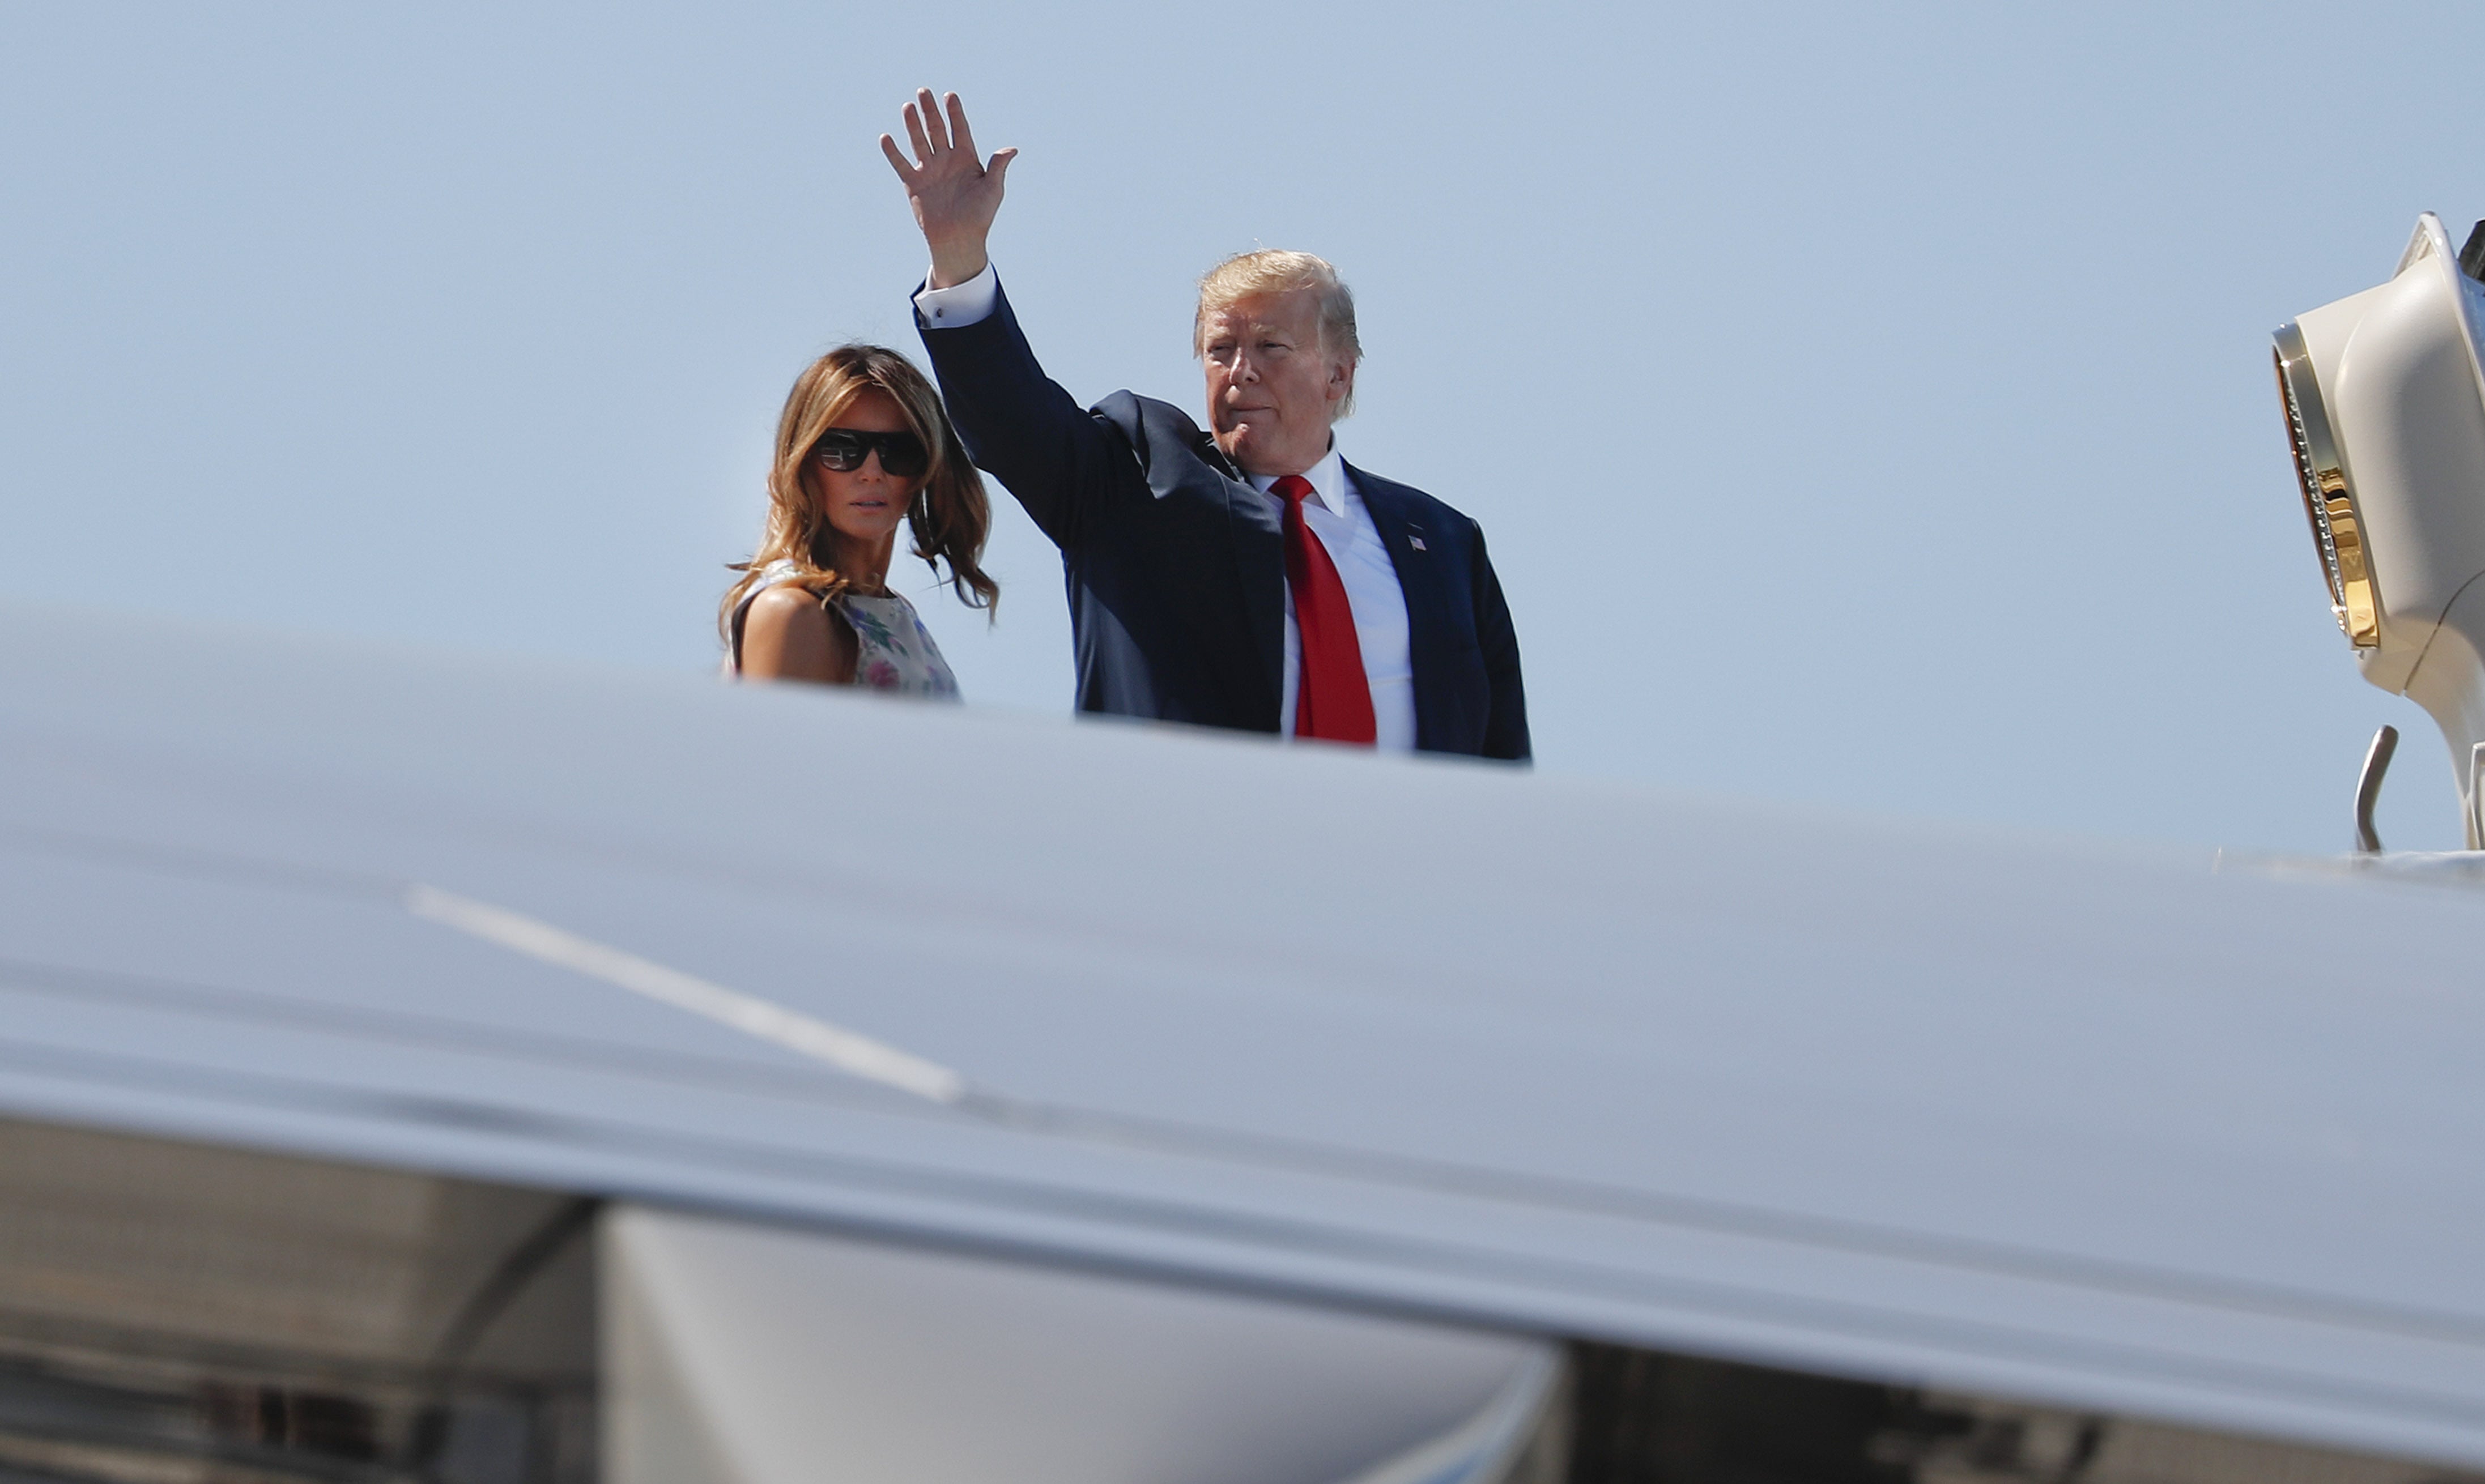 President Donald Trump, right, waves as he and first lady Melania Trump board Air Force One prior to departure from Palm Beach International Airport, Sunday, April 21, 2019, in West Palm Beach Fla.